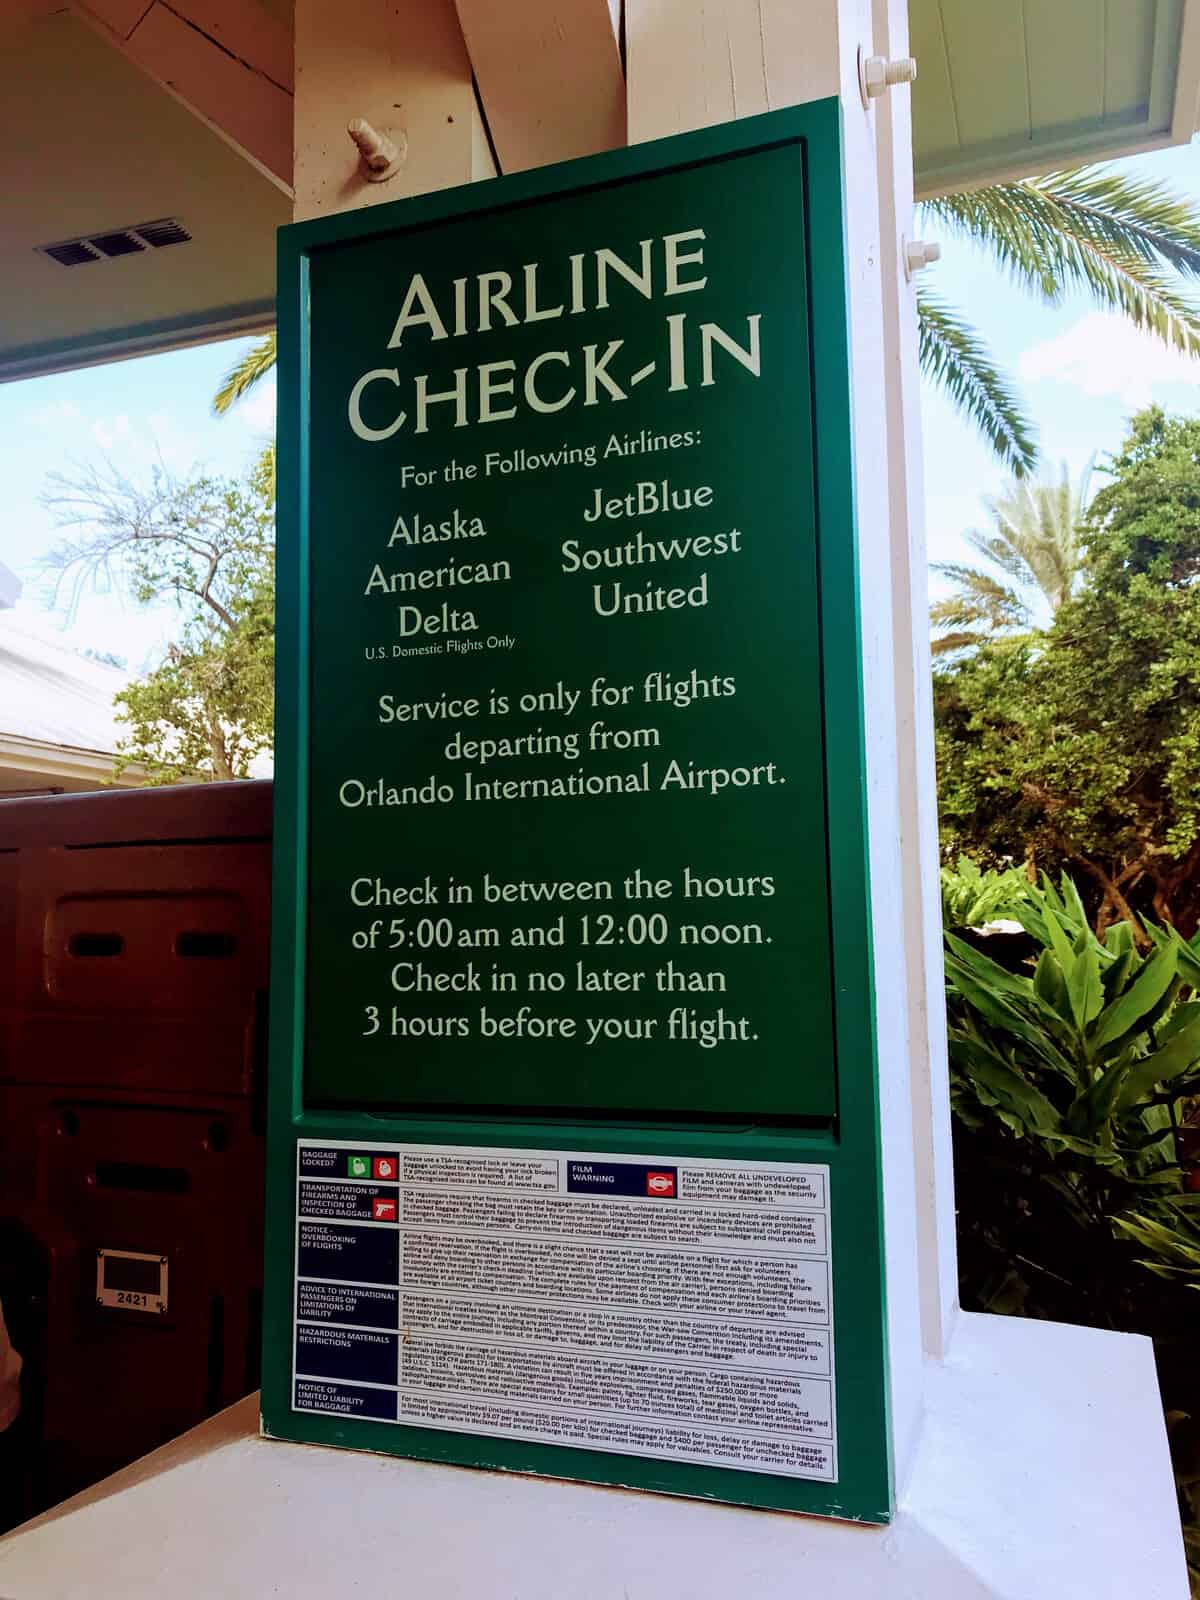 How Resort Airline Check-In at Disney World works